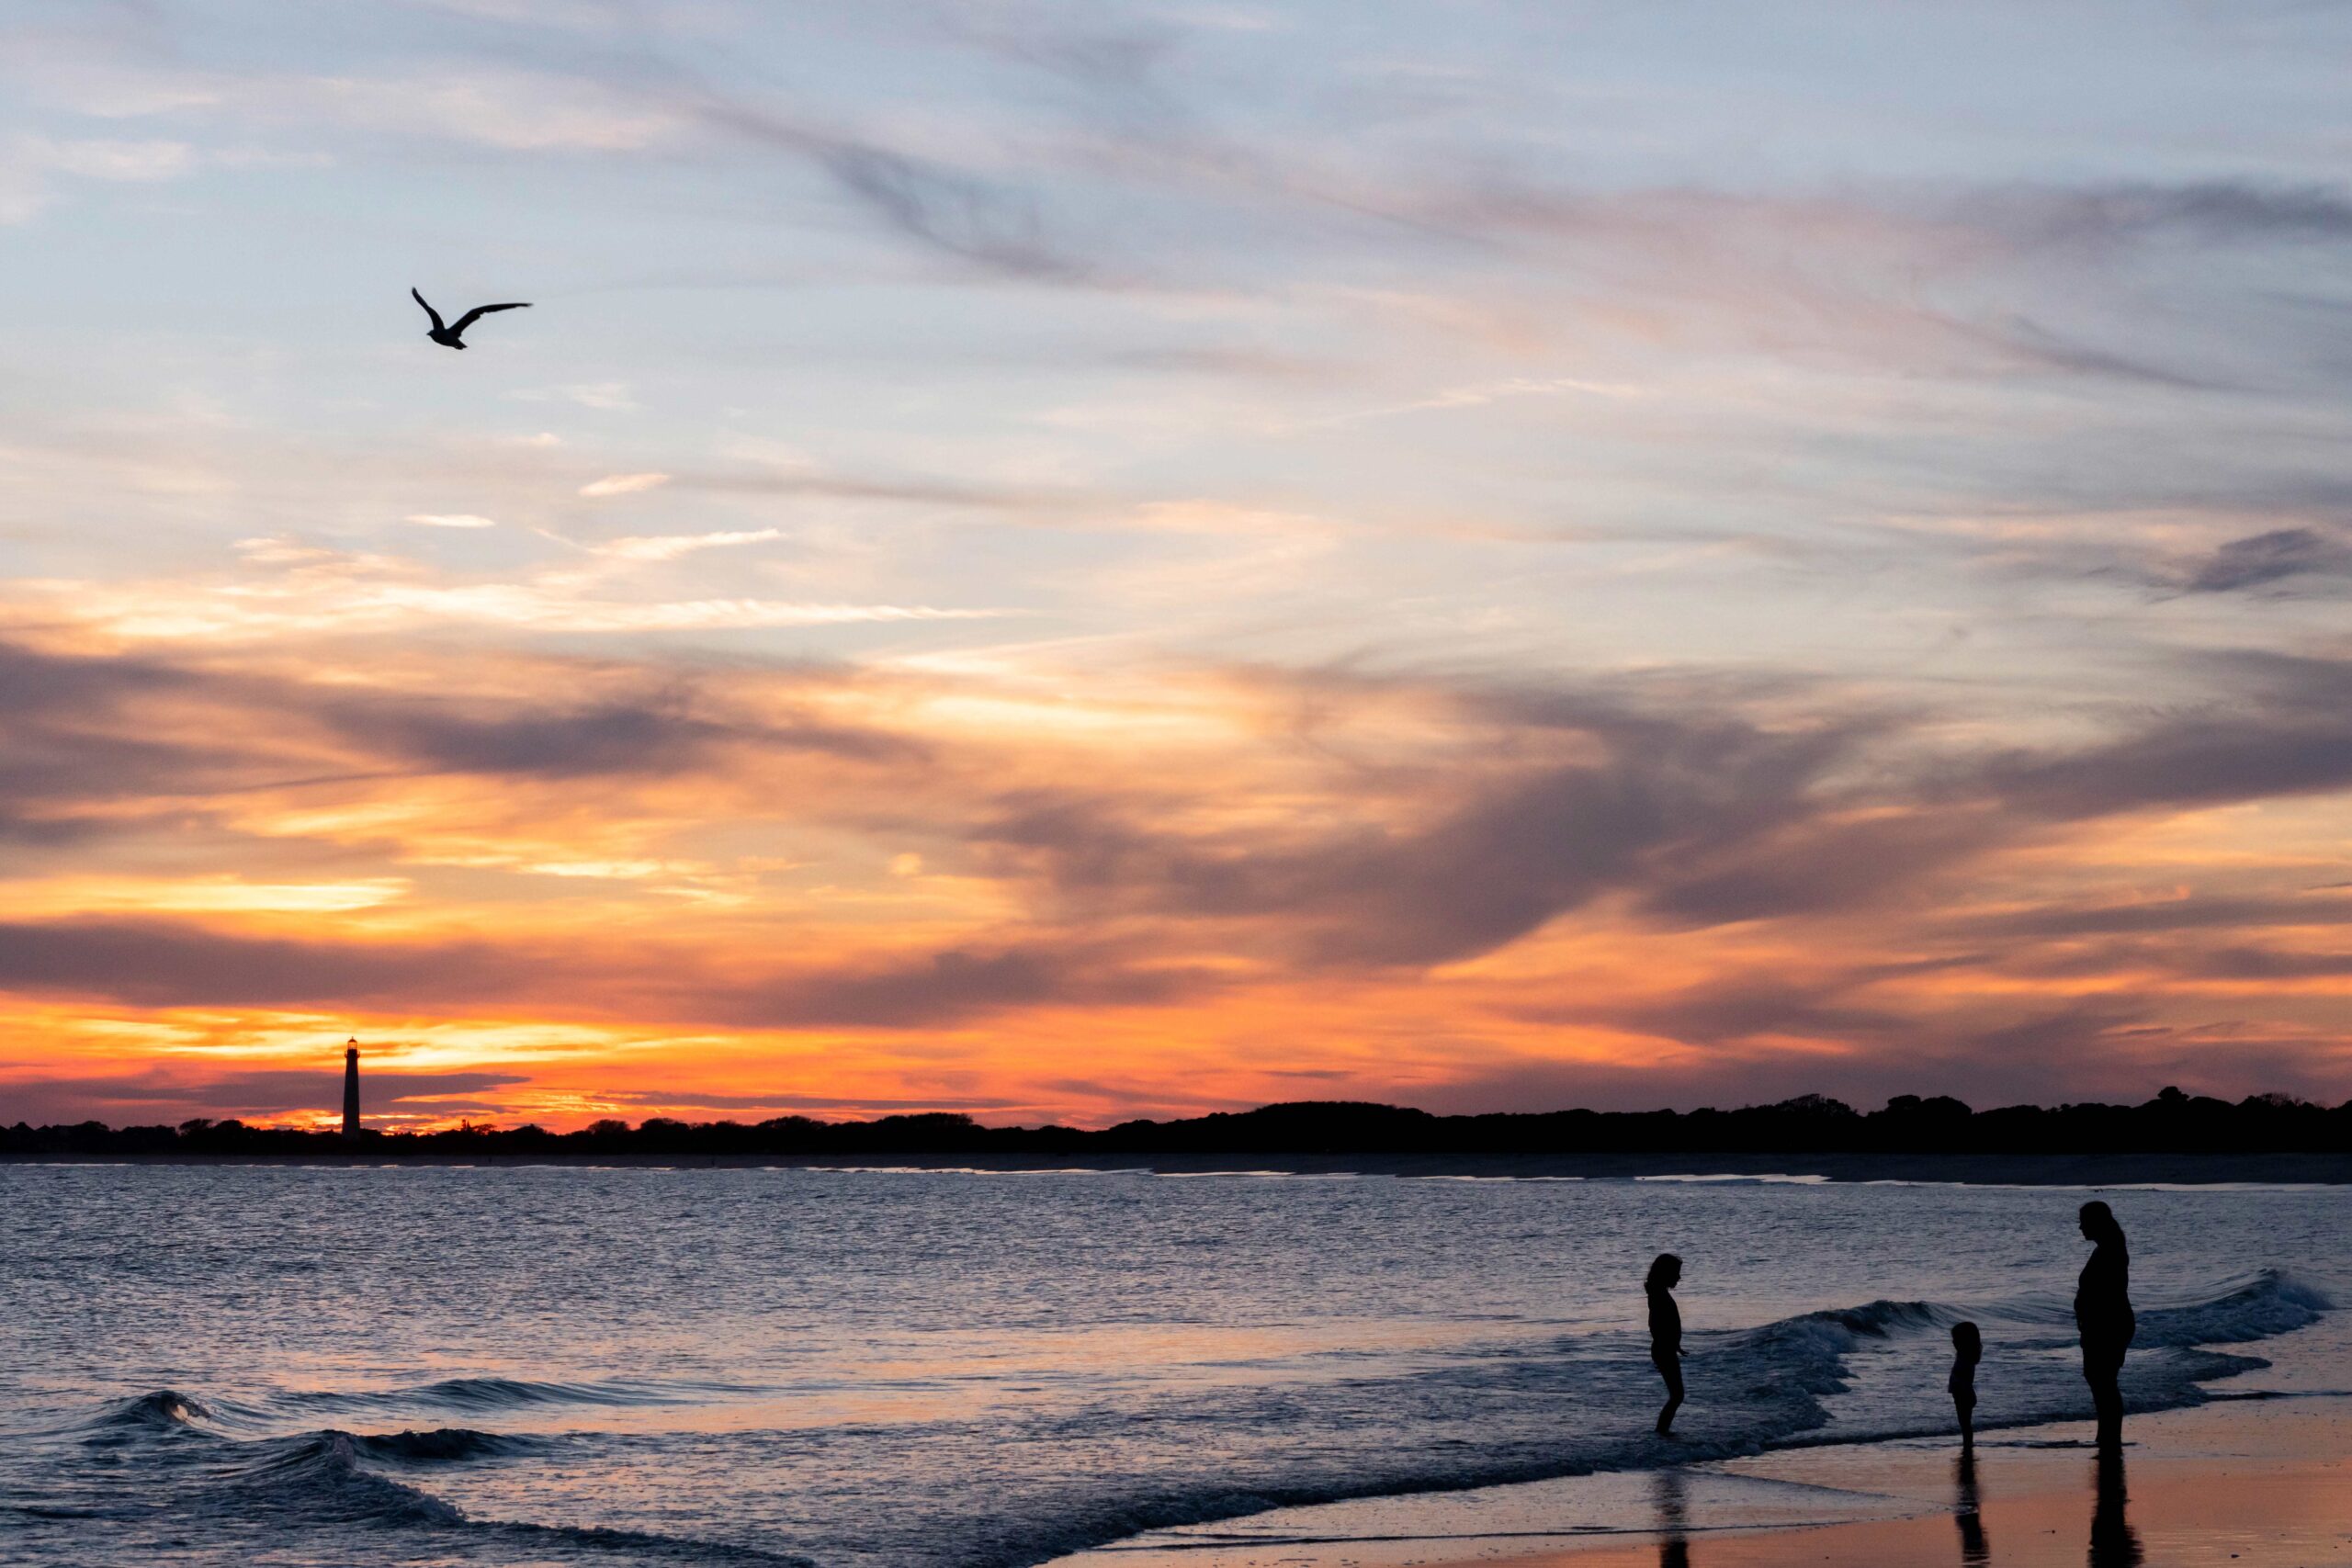 A parent and two children standing at the ocean with a seagull flying in the sky with pink and purple clouds at sunset with the Cape May Lighthouse in the distance